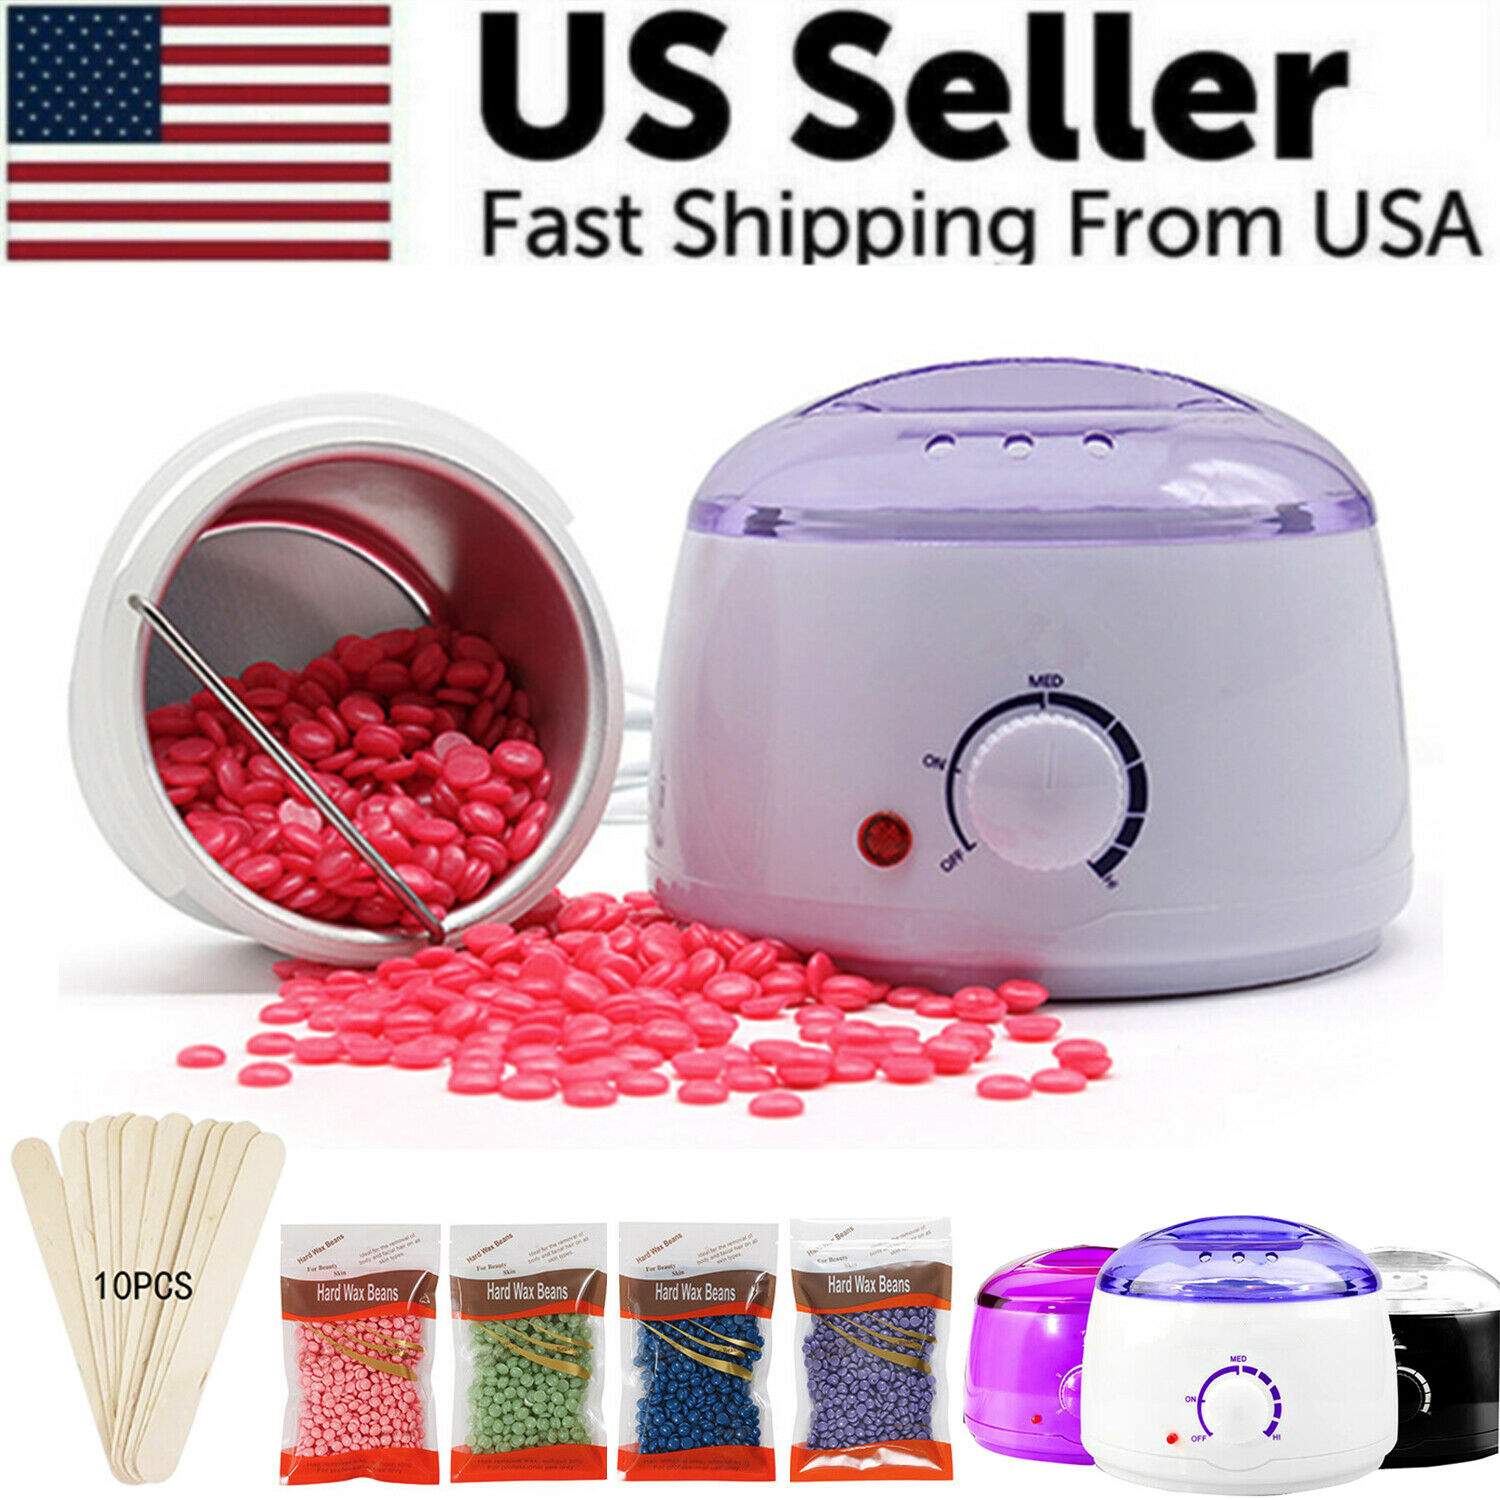 Professional Wax Warmer Heater Hair Removal Depilatory Home Waxing Kit Beans Us